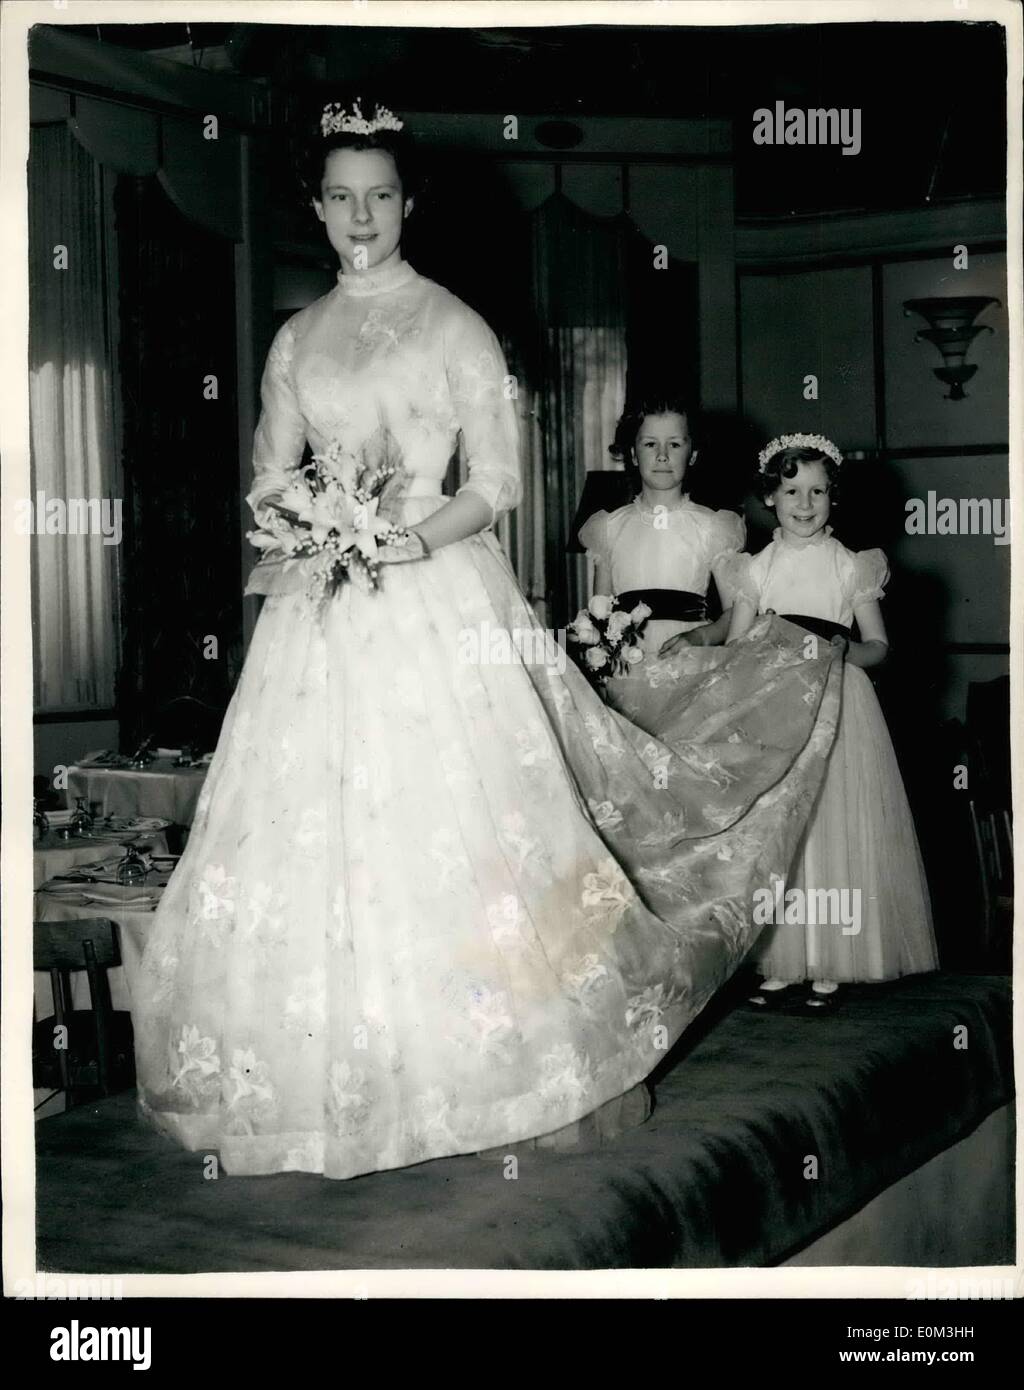 May 05, 1953 - Final Dress Rehearsal for the Berkeley debutante dress show: wedding gonna by Dior: A final dress reheard was held this morning at the Berkley restaurant - for this afternoon's Berkeley Debutante Dress show to be held in aid of the N.s.p.c.g.- and in which debutantes are displaying styles by the famous Christian Dior. Keystone photo shows lady Roee Blithe were a white Organza wedding gown, gold embroidery and lilies. The bridal attendants, whose dresses are not by Dior - are ( left) Wish Mary Anne Parker-Bonnee (7) and winsSarah Greenly aged 6. Stock Photo